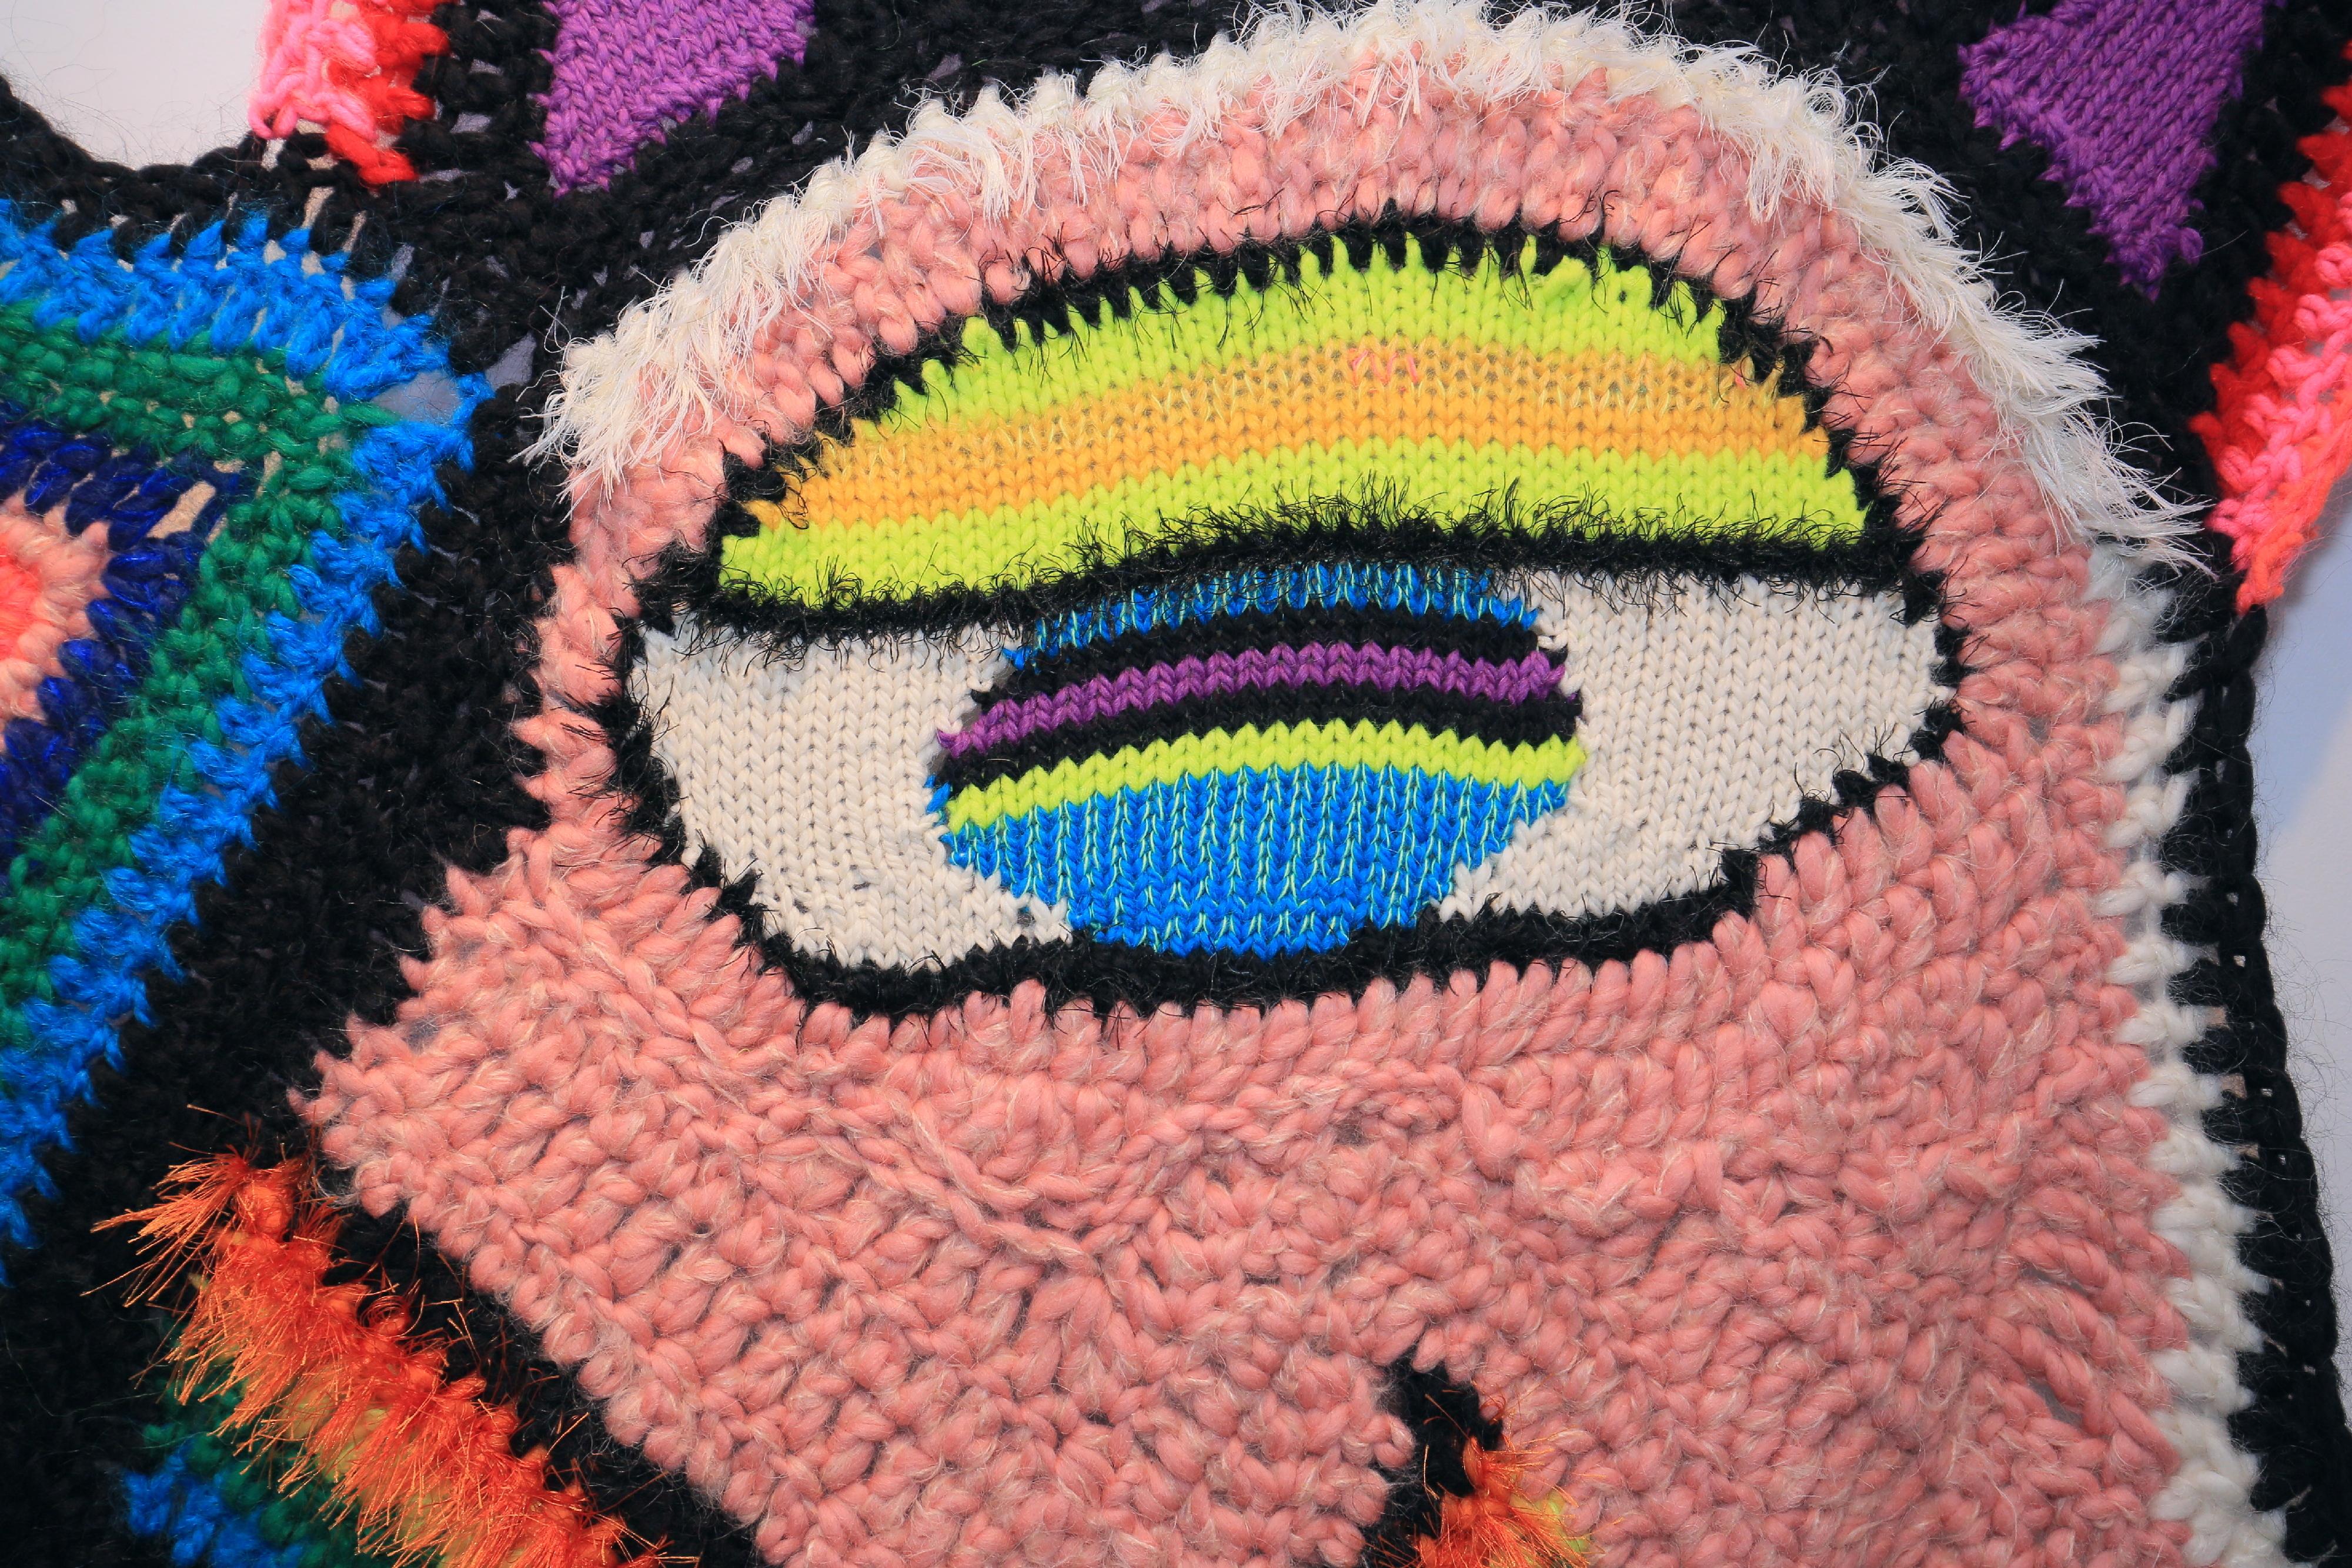 Textile Art, Hand-crafted, Knit and Crochet Art Blanket, Knitted Tapestry, Wall hanging, Affordable Art.
Multicoloured, abstracted, geometric face revealed within a Harlequin patchwork of pattern and colour. Luxurious blends of predominantly wool